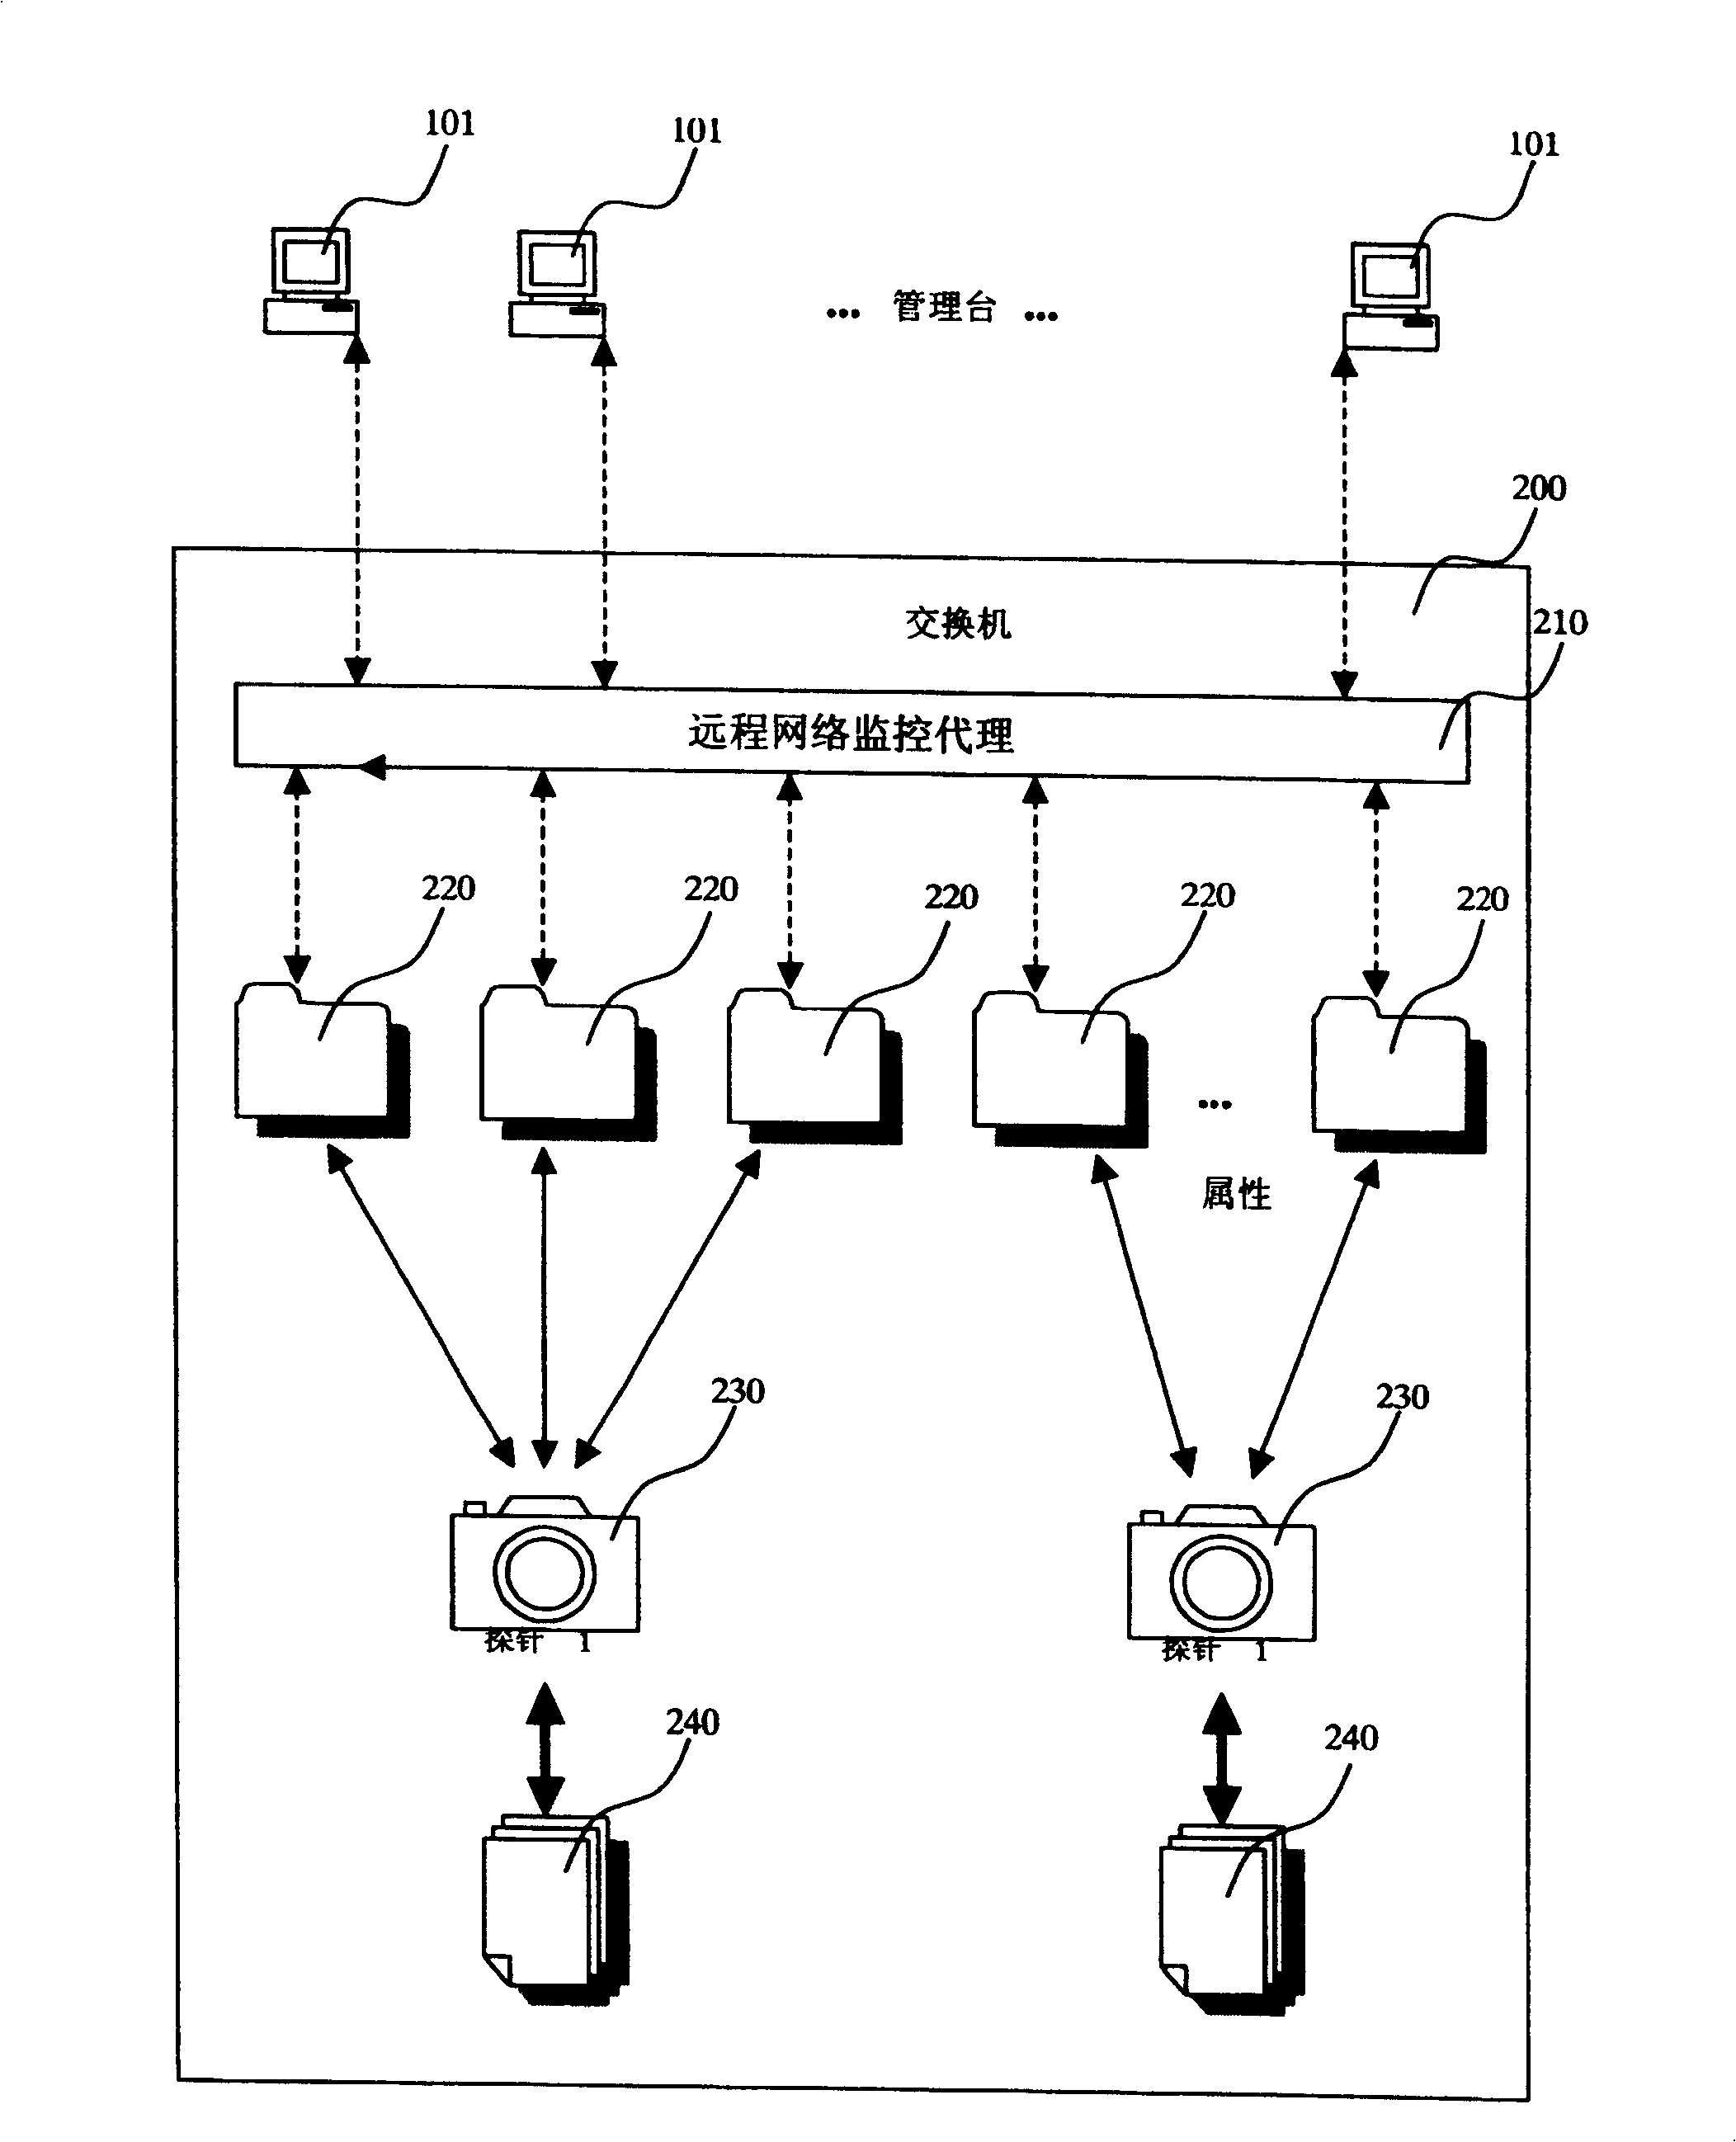 Method for dynamic real time capturing logic commands input from UNIX terminal user